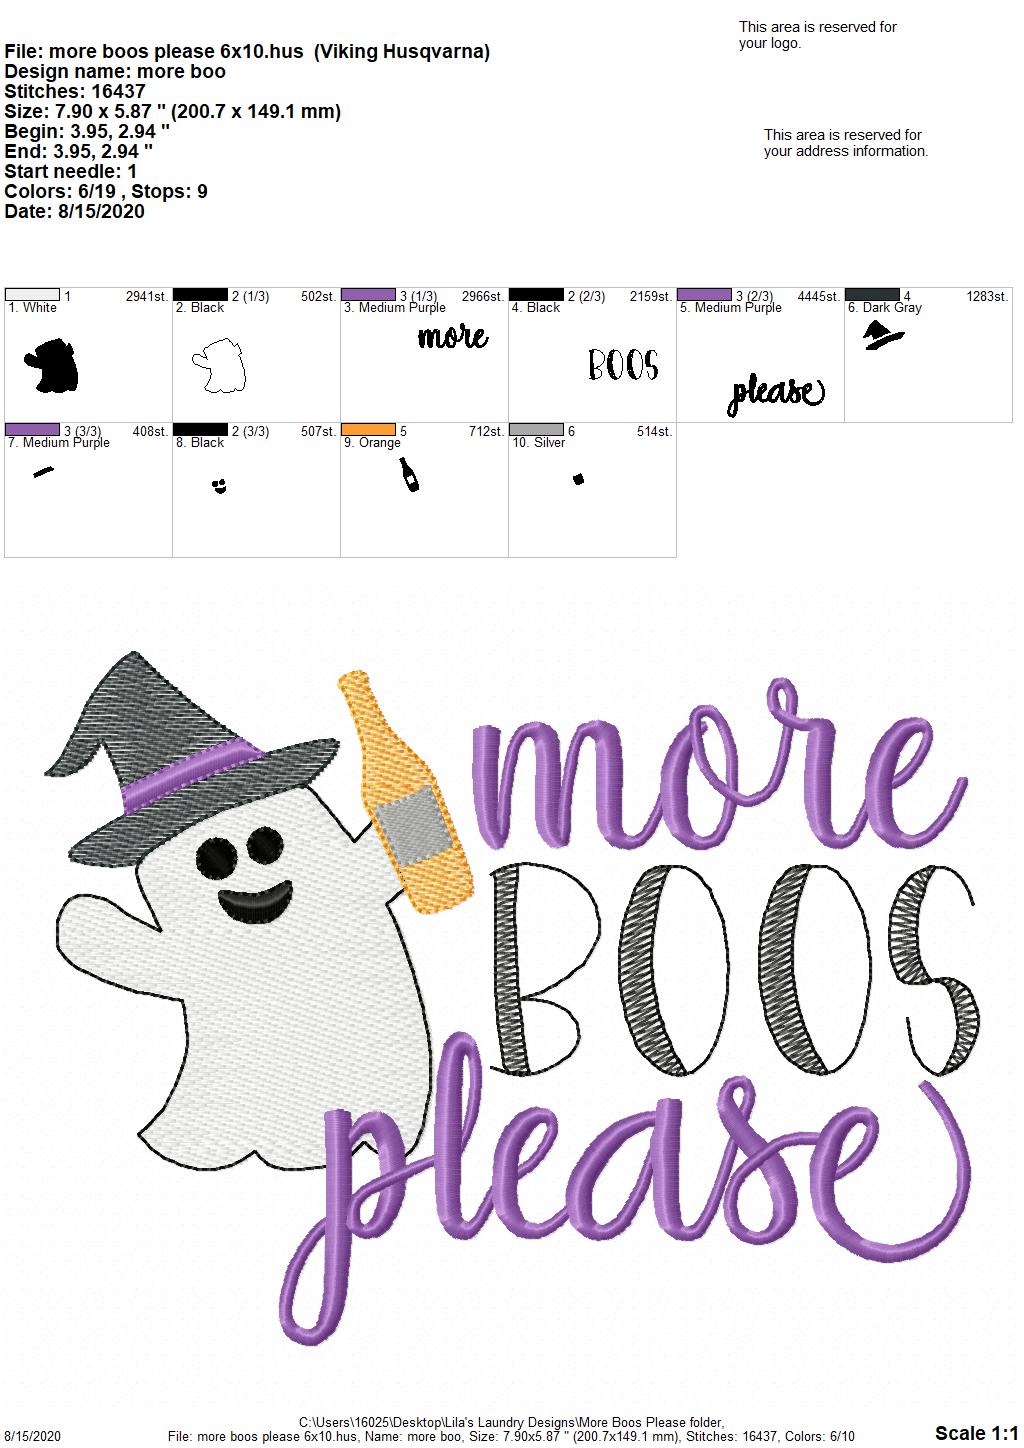 More Boos Please - 2 Sizes - Digital Embroidery Design